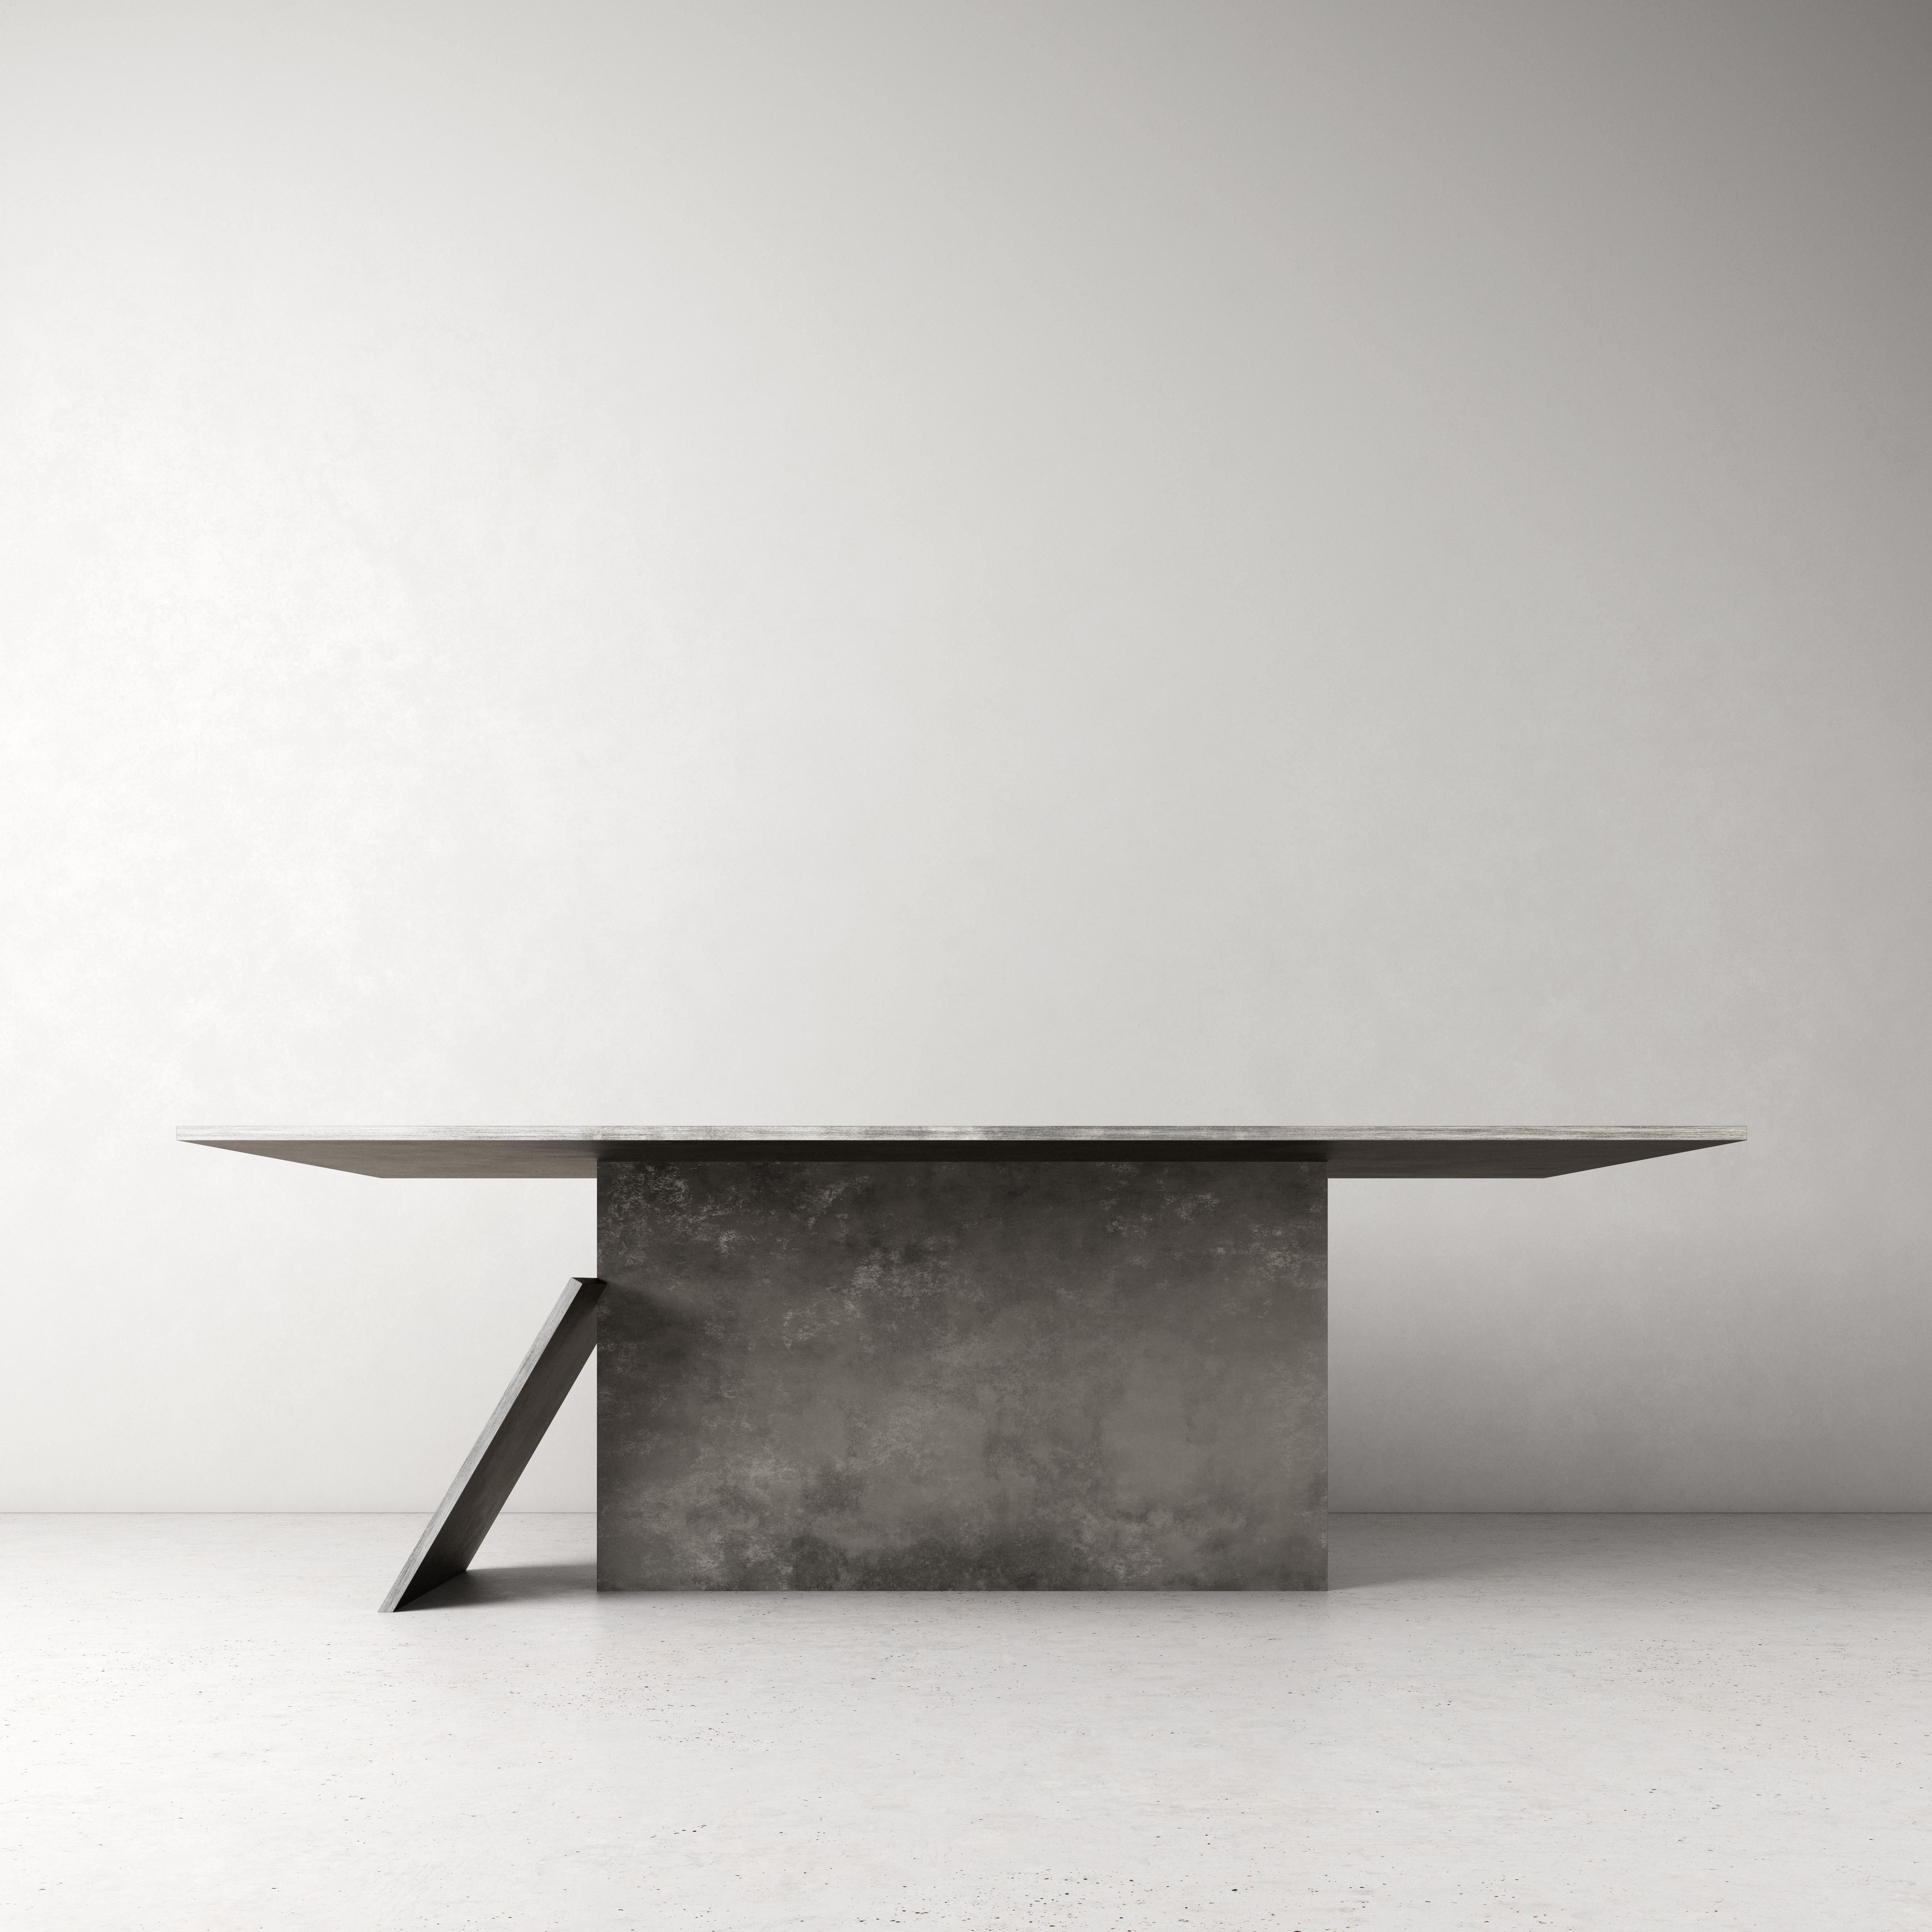 Contemporary table T by dAM Atelier
Dimensions: L 220 x W 110 x H 73
Materials: Delabrè stainless steel
Also available in verdegris copper, please contact us.

dAM atelier is a duo of young Italian architects sharing the passion for design and